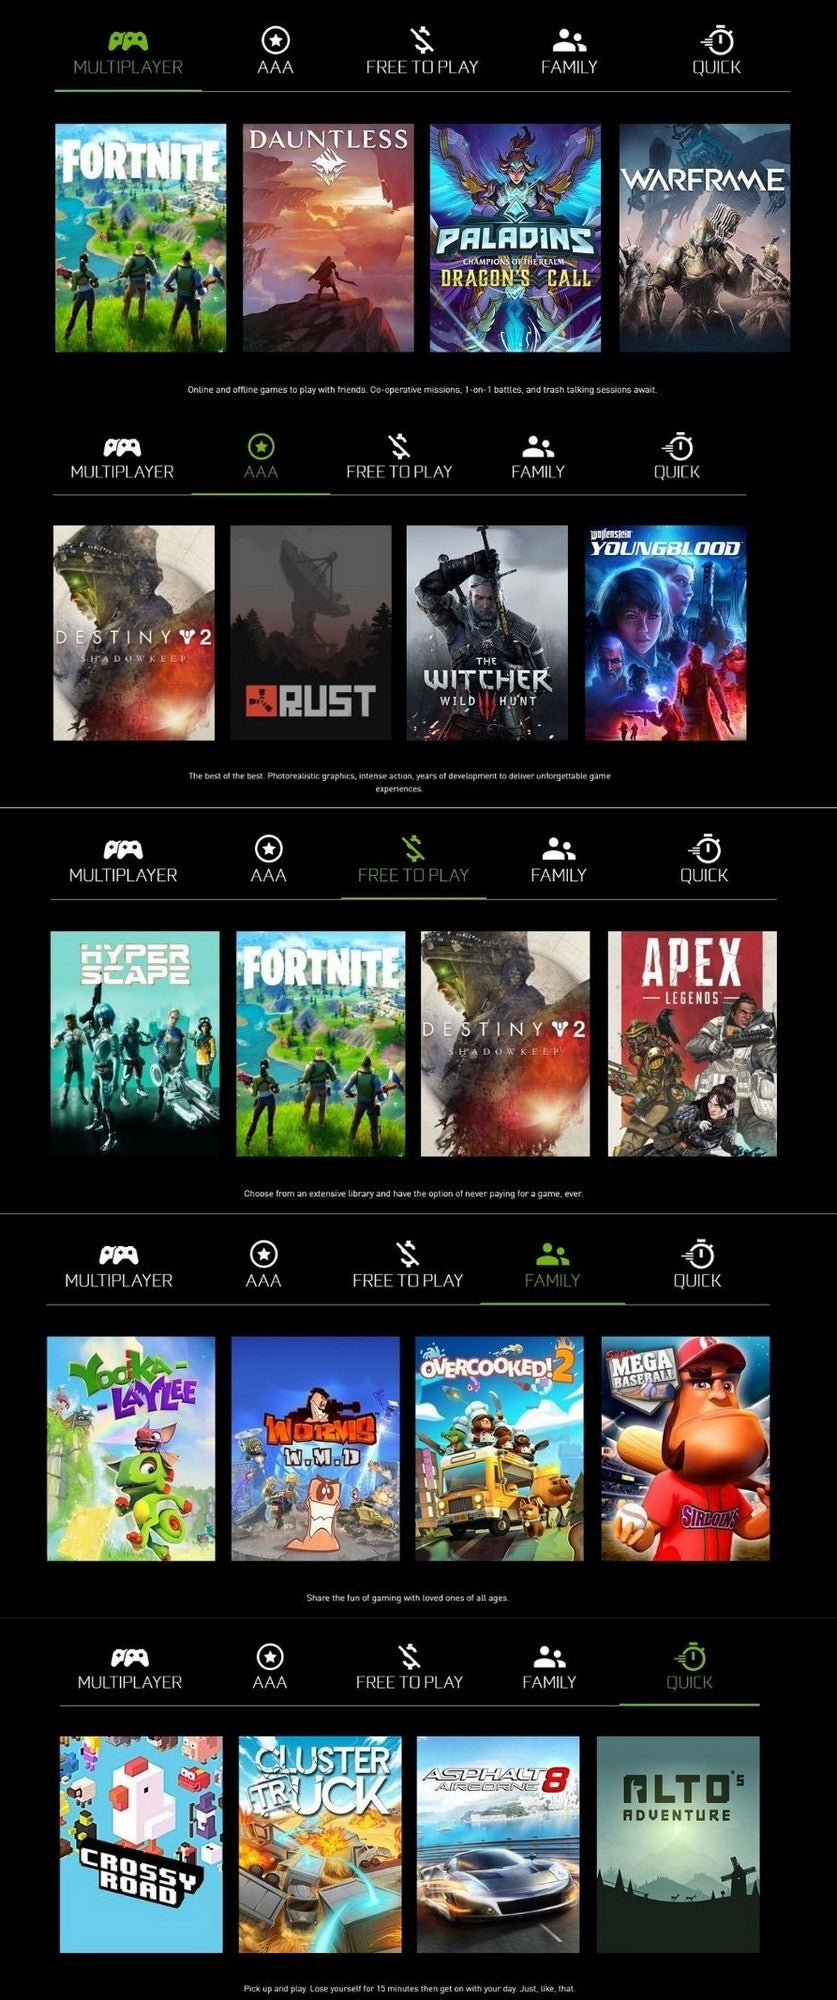 NVIDIA SHIELD Android TV Pro Streaming Media Player; 4K HDR Movies, Live  Sports, Dolby Vision-Atmos, AI-Enhanced Upscaling, GeForce NOW Cloud  Gaming, Google Assistant Built-In, Works with Alexa: Buy Online at Best  Price